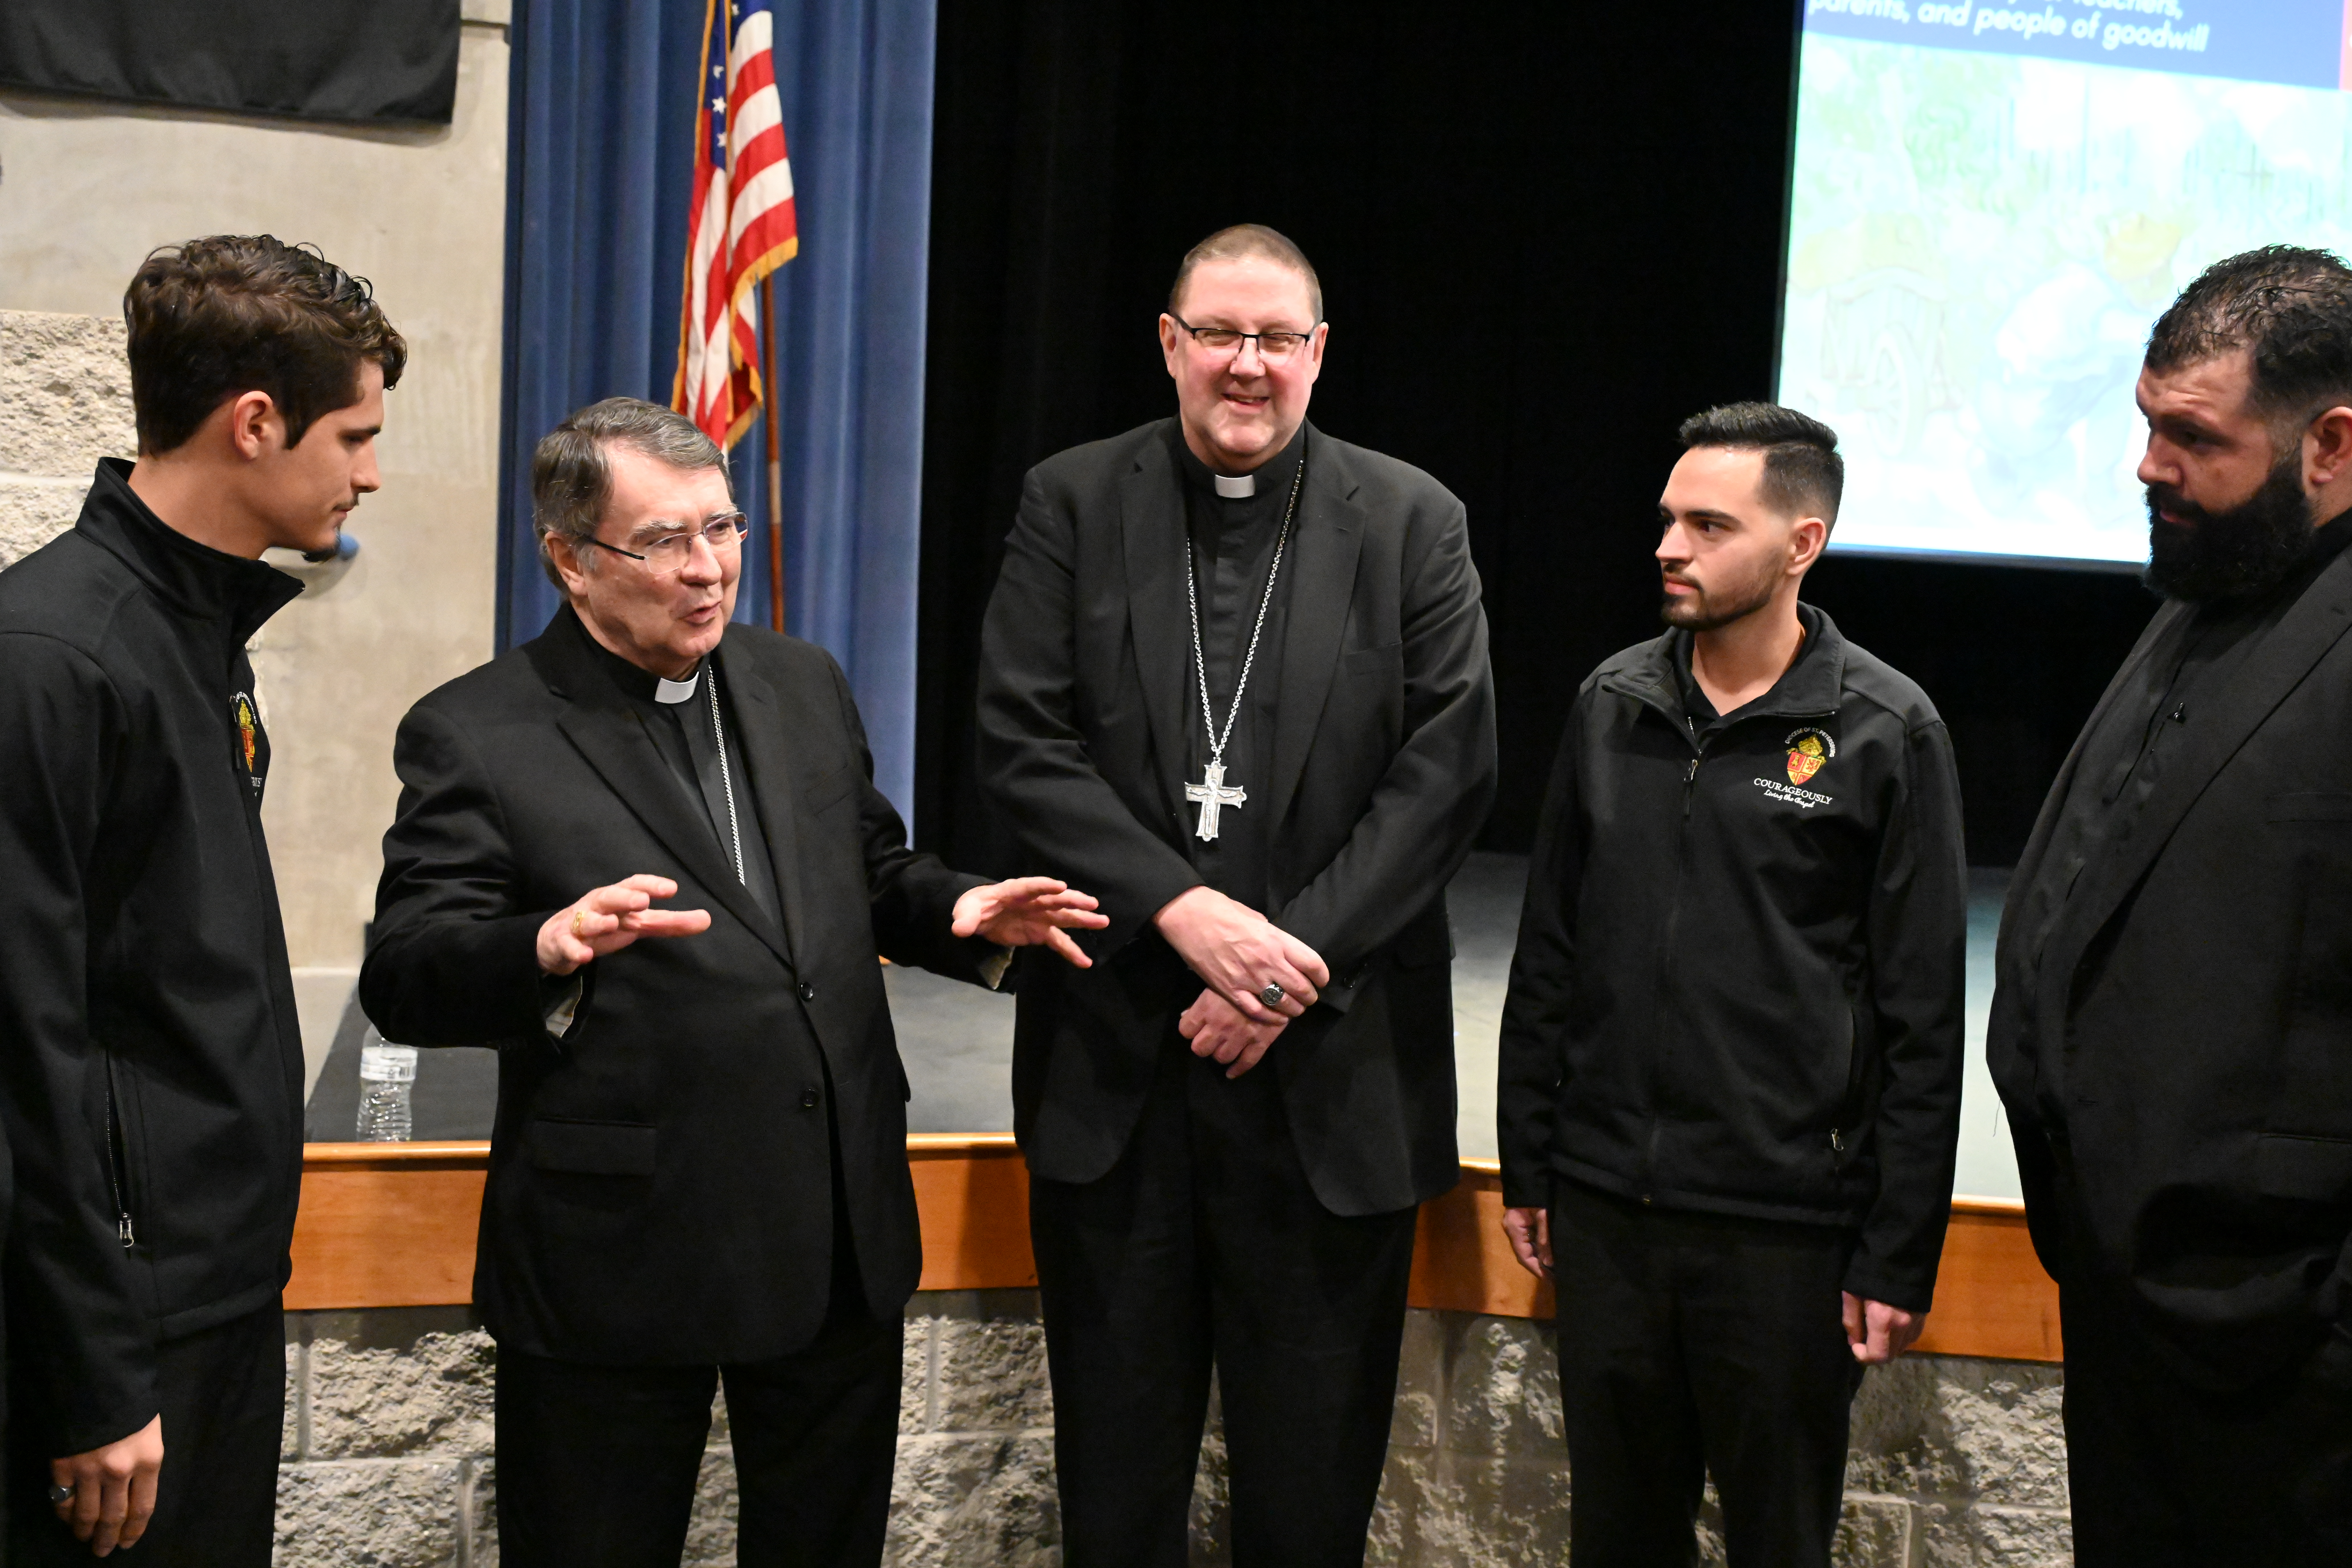 Cardinal Pierre and Bishop Parkes speak with Diocese of St. Petersburg seminarians who attended the panel discussion. Photo by Teresa Peterson.